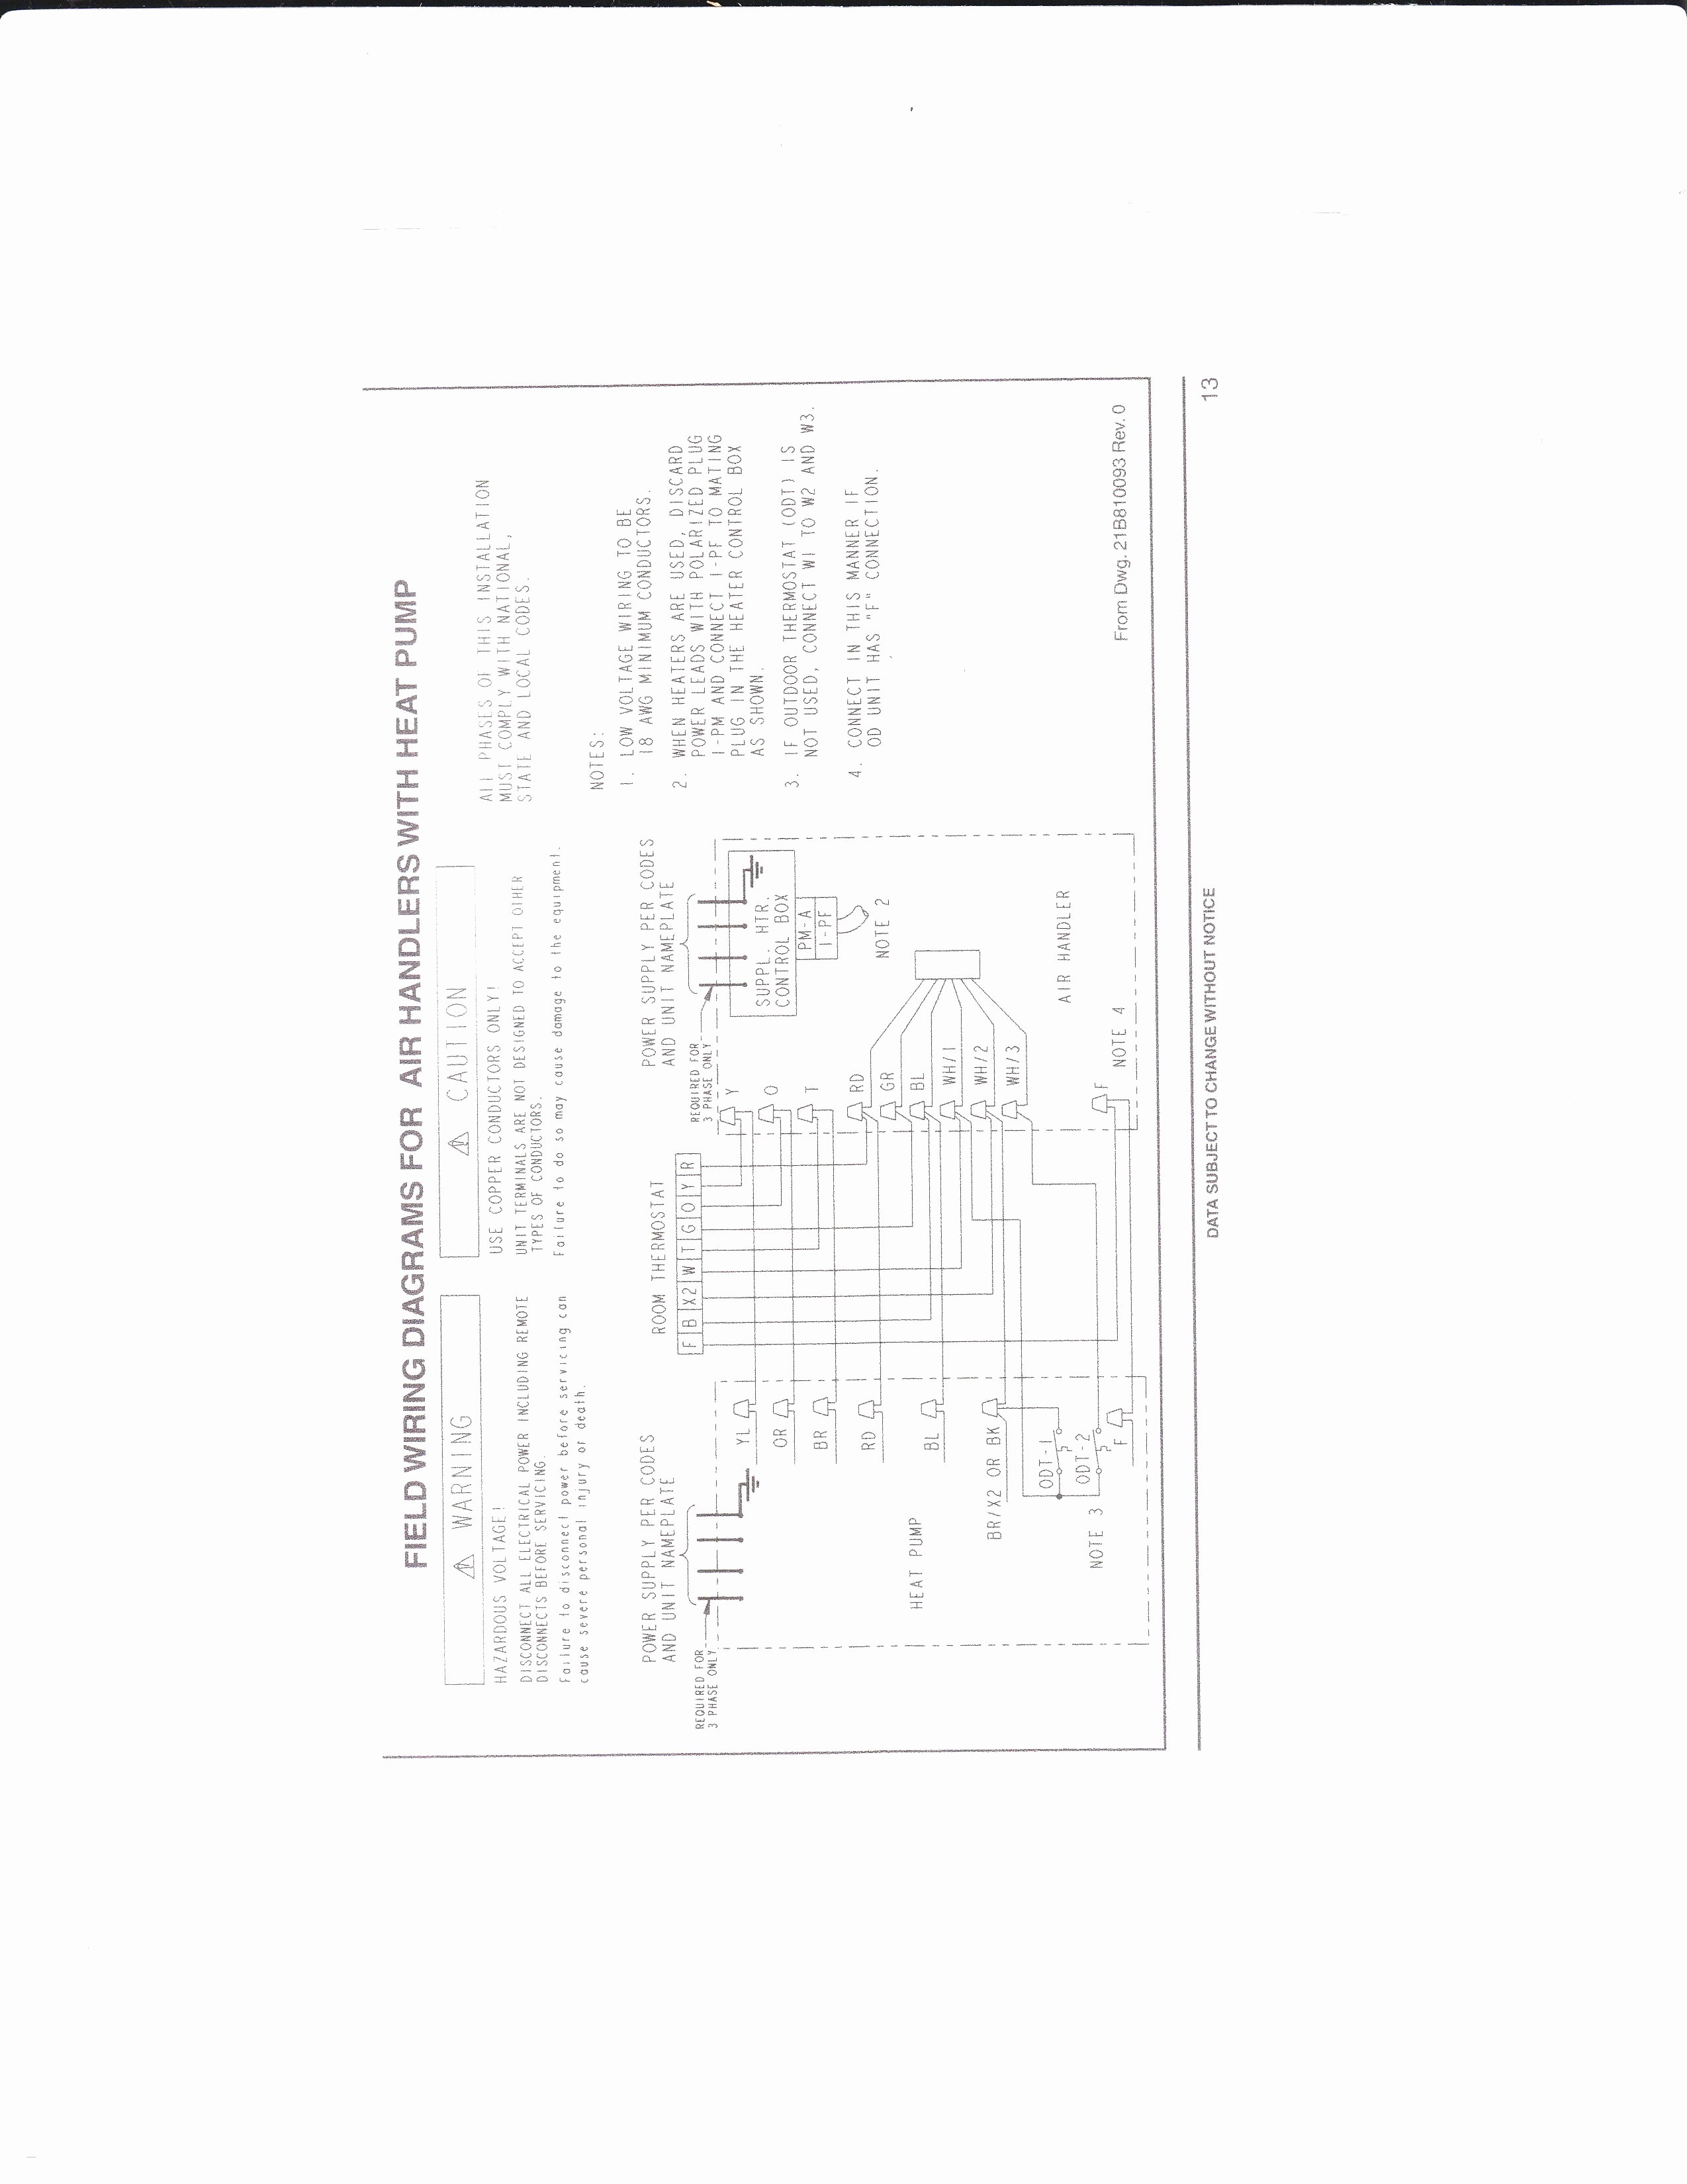 Wiring Diagram for A Honeywell thermostat 7351 Honeywell Programmable thermostat Wiring Diagram Wiring Of Wiring Diagram for A Honeywell thermostat